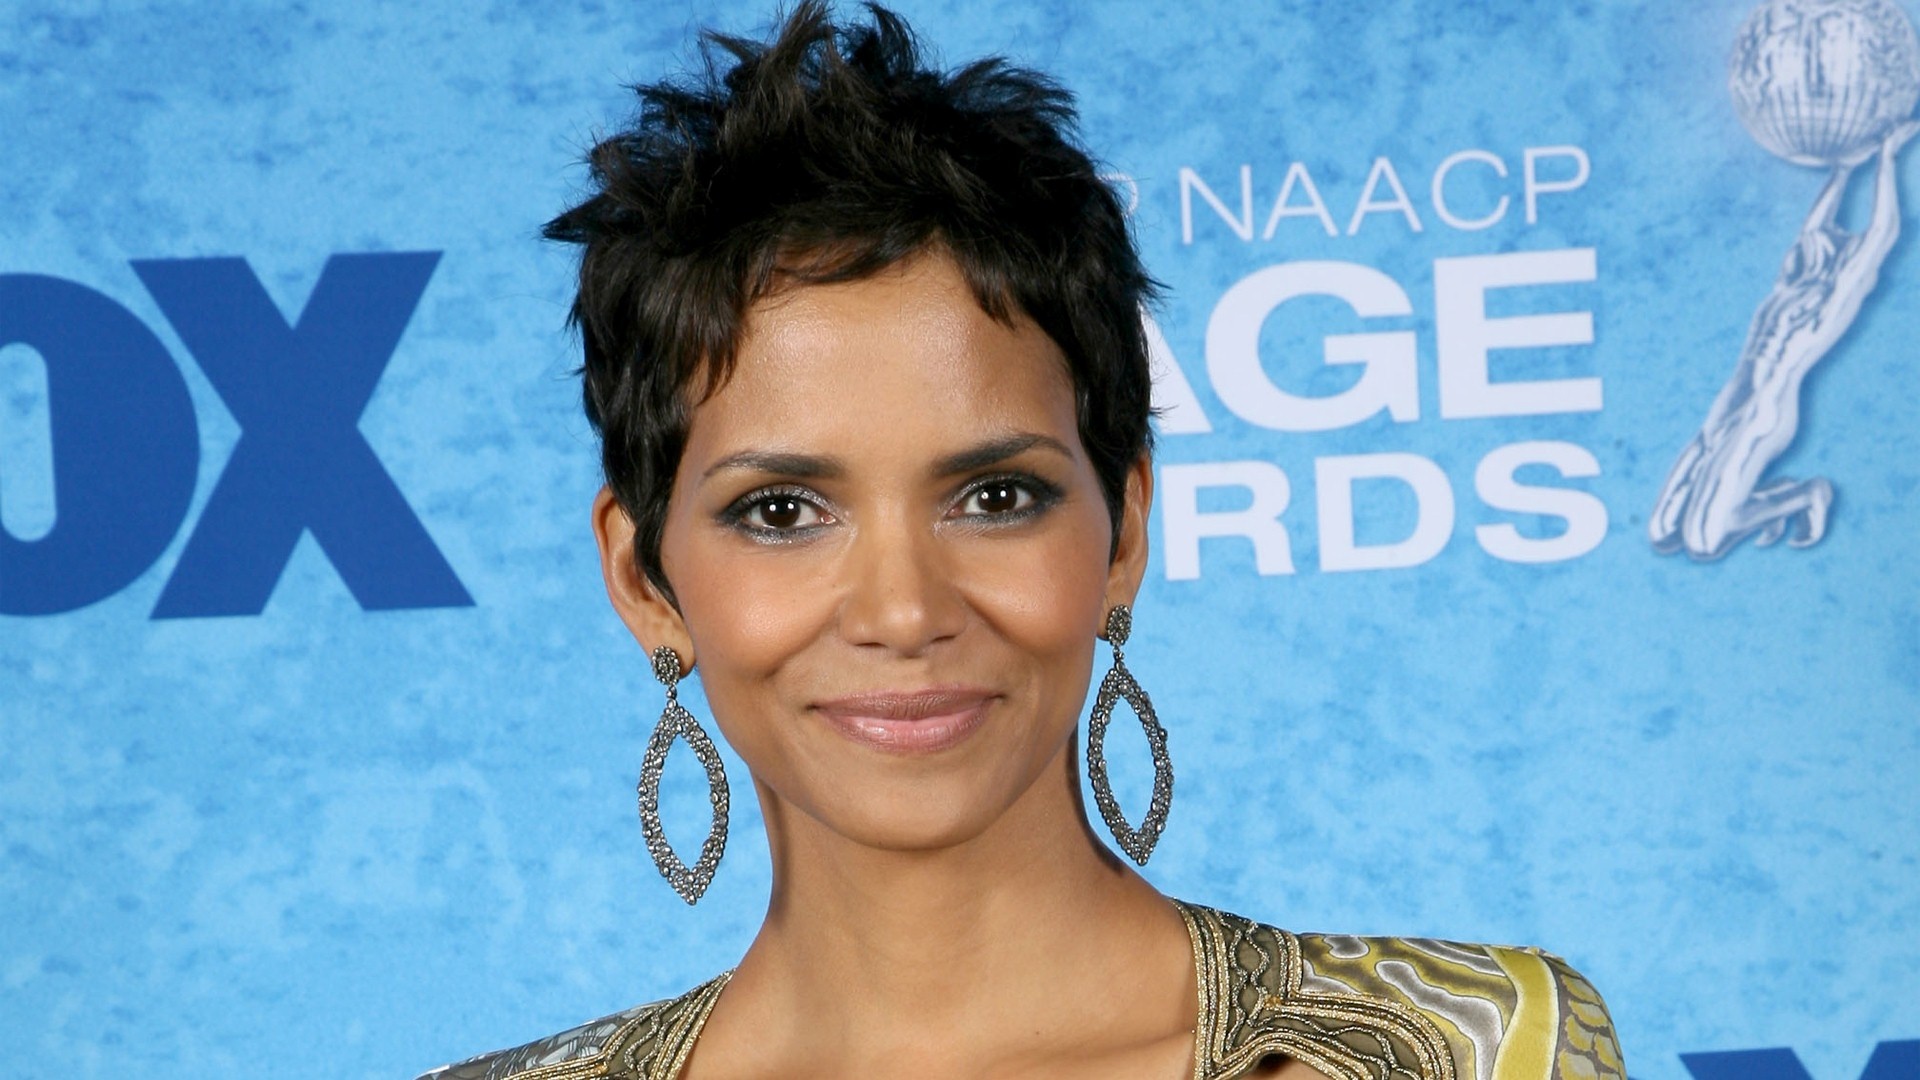 Halle Berry: American film actress, the first African American to win the Academy Award for best actress. 1920x1080 Full HD Wallpaper.